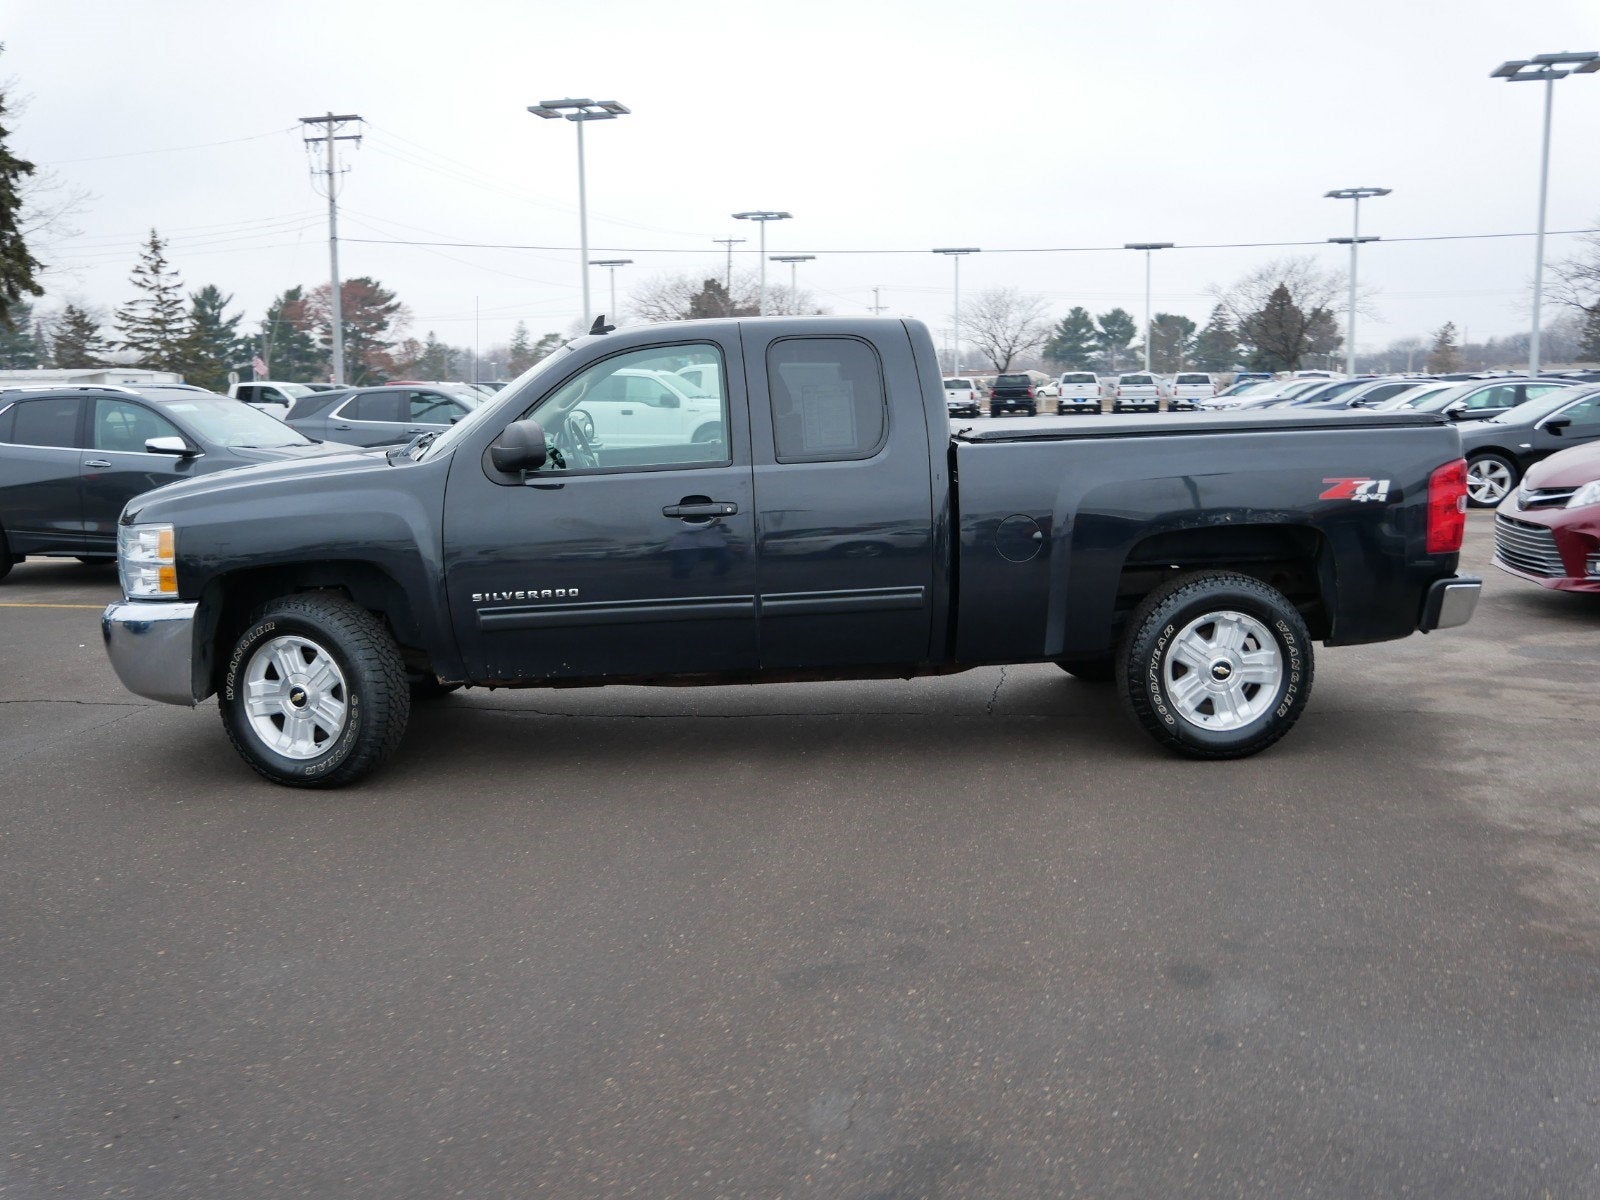 Used 2012 Chevrolet Silverado 1500 LT with VIN 1GCRKSE7XCZ193471 for sale in Fridley, Minnesota